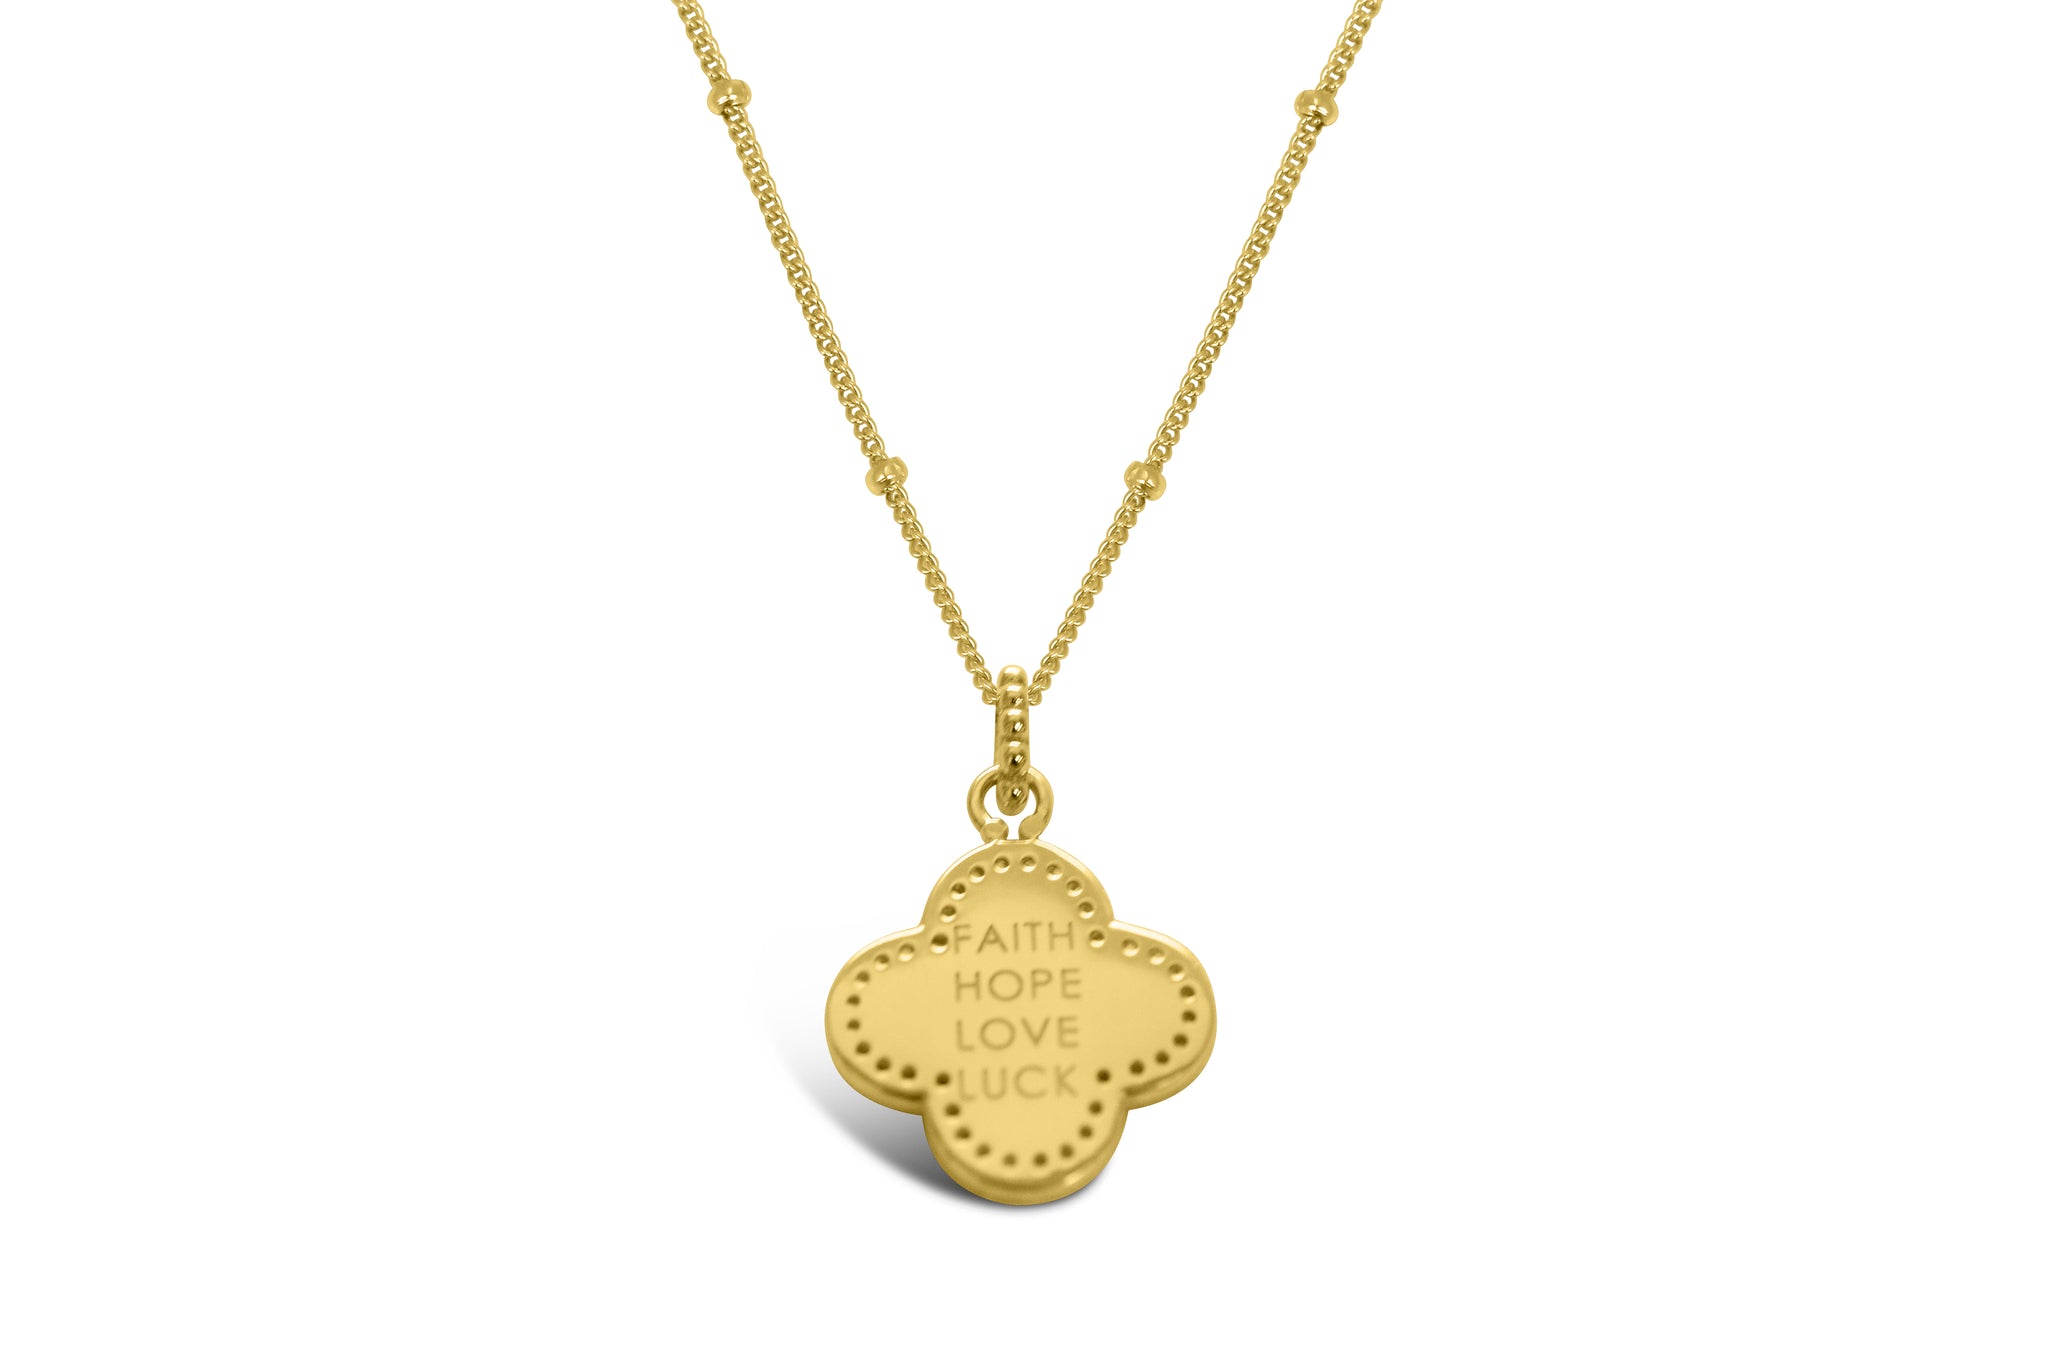 Crystal Heart Necklace For Women | Gold Plated Joining Heart Pendant For  Girls Clover Necklace| - Golden, क्रिस्टल नेकलेस, क्रिस्टल का हार -  JEWELSALLEY.IN, New Delhi | ID: 2851897503633